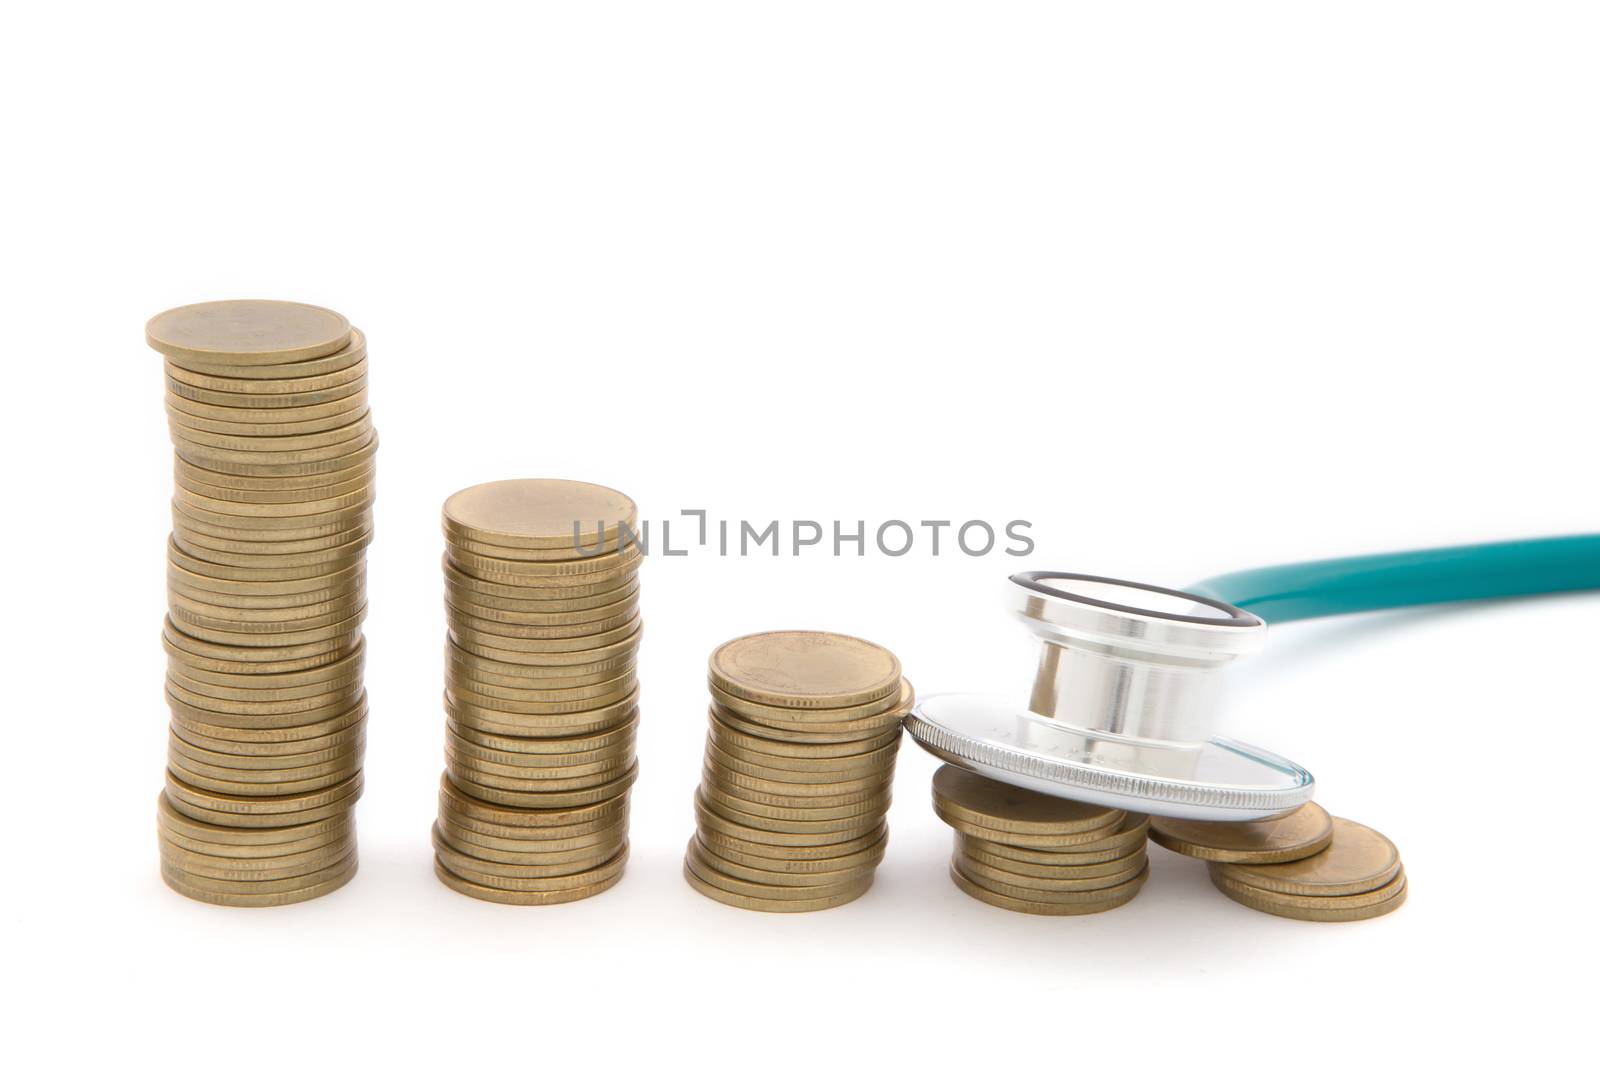 Stethoscope over  coins. Concept of saving bad economy